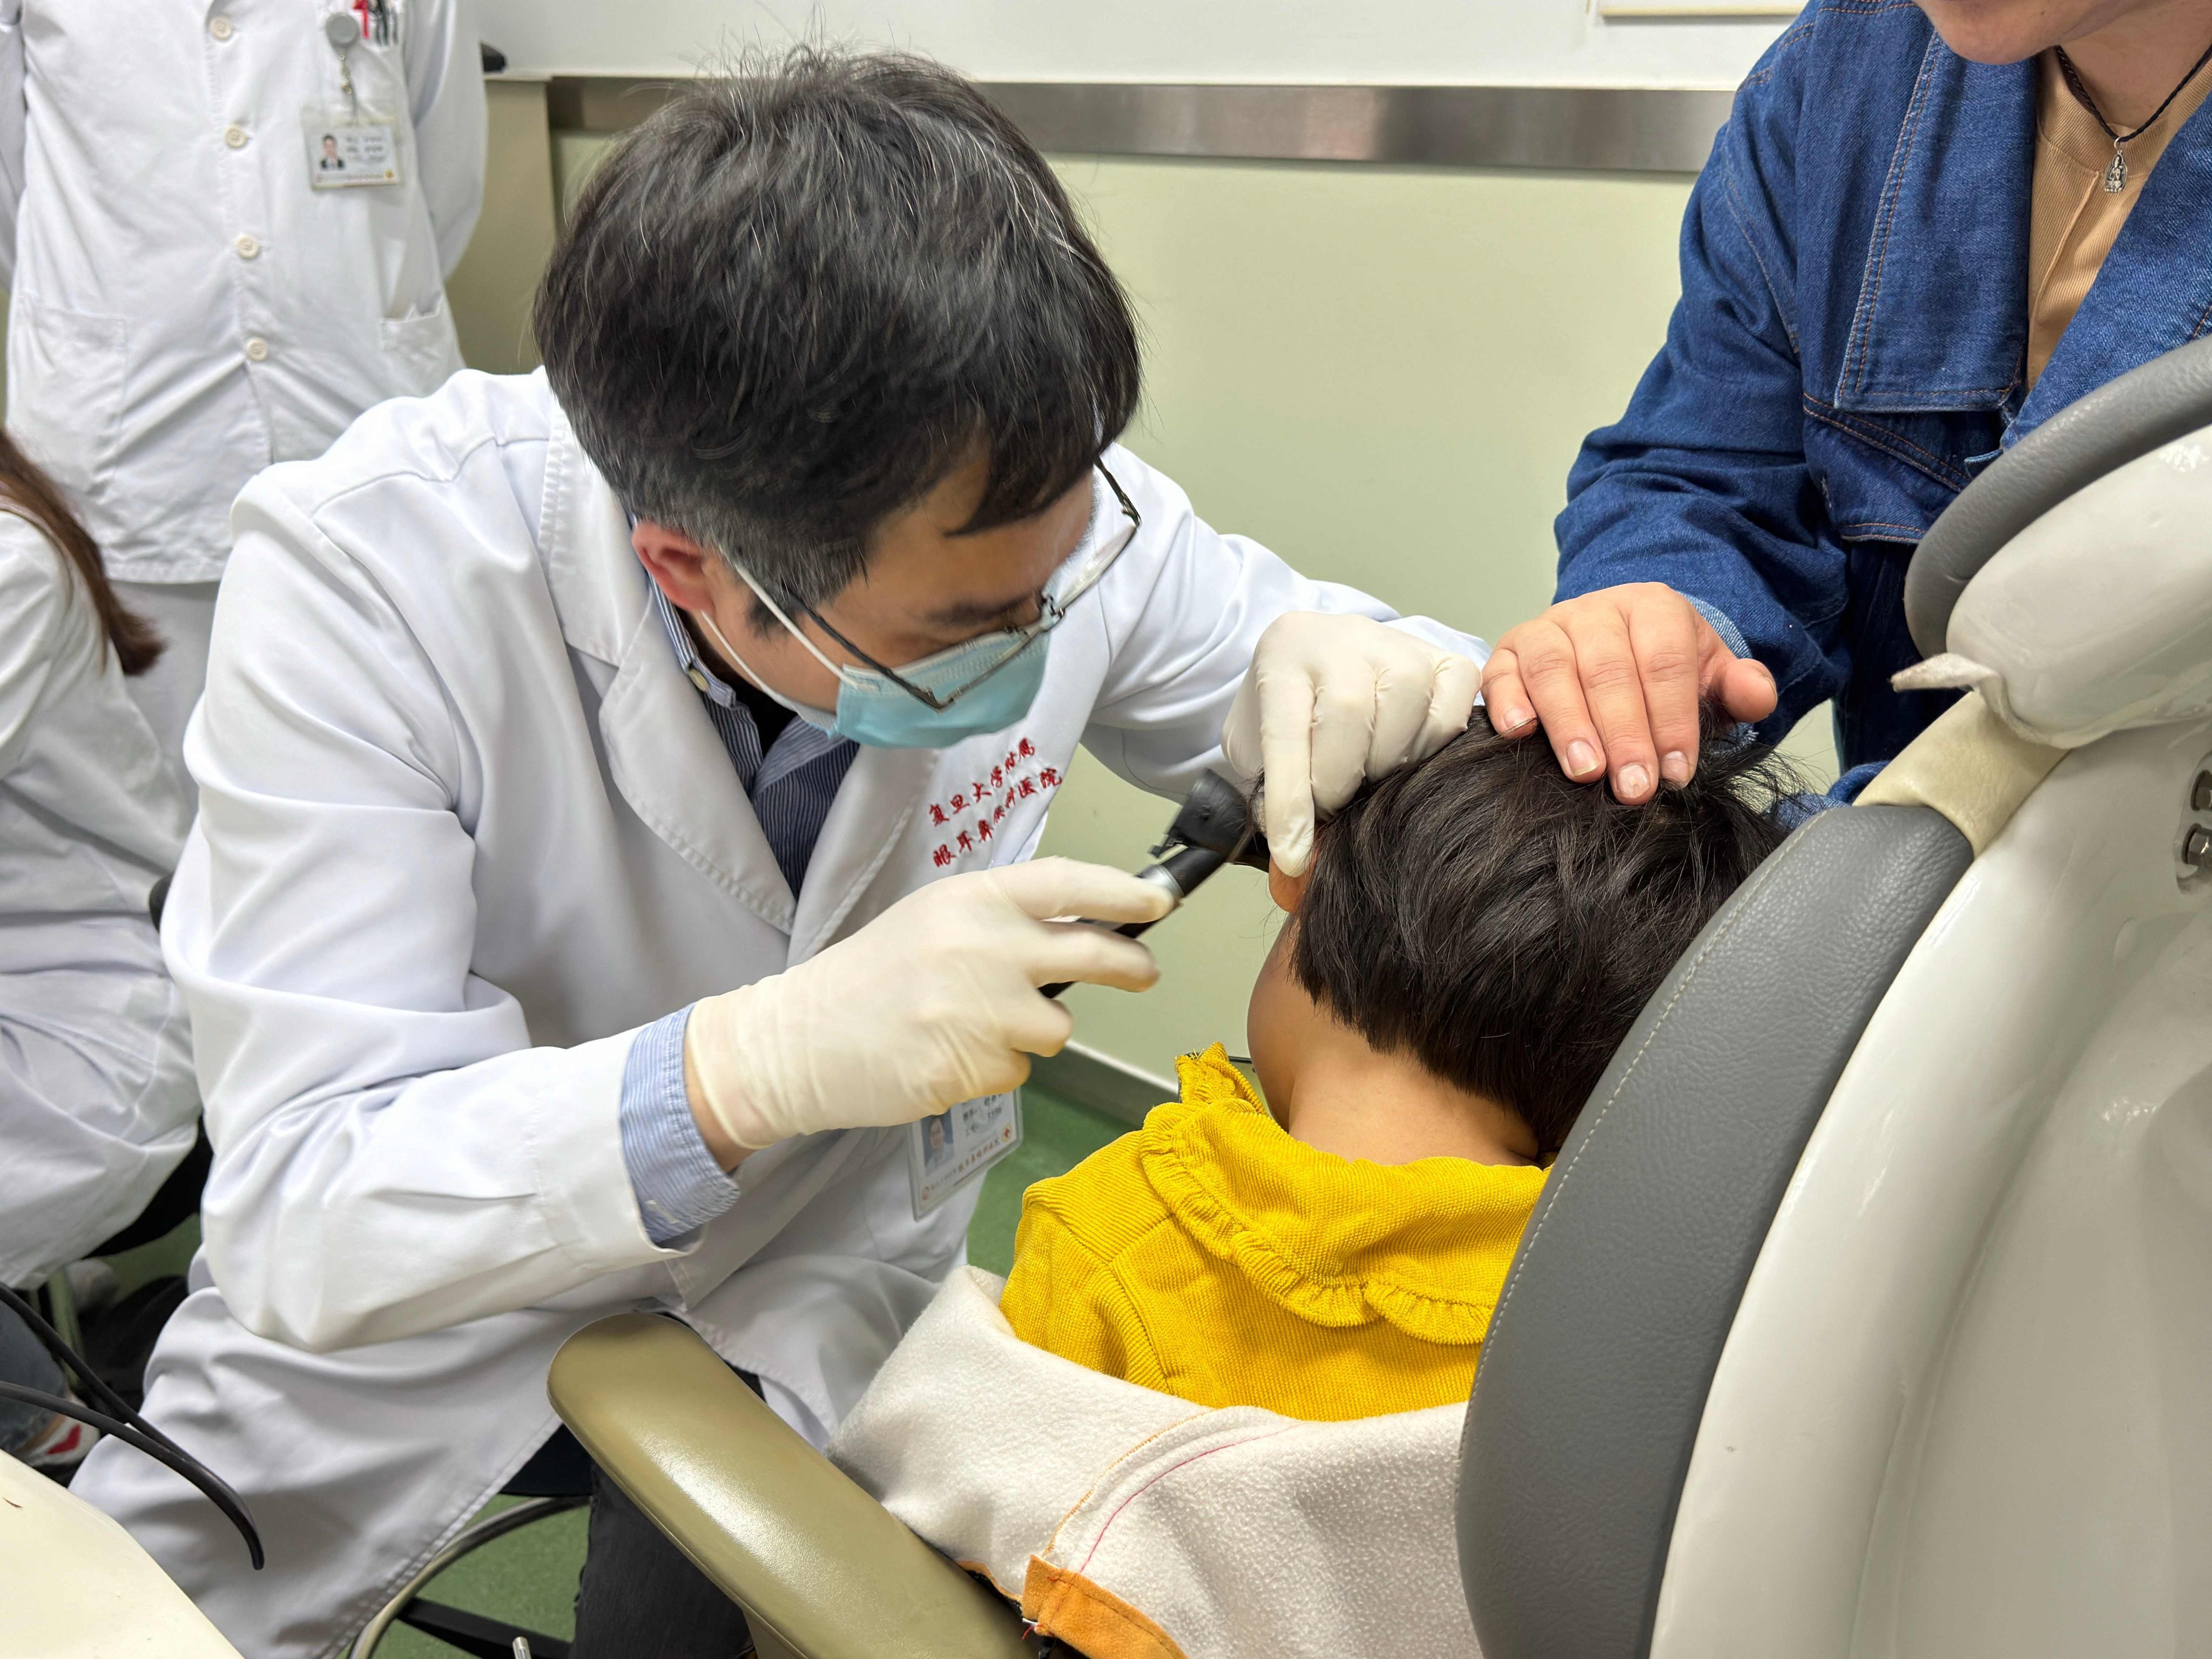 Dr Shu Yilai examines a young patient at the Eye & ENT Hospital of Fudan University. Photo: AFP / Eye & ENT Hospital of Fudan University